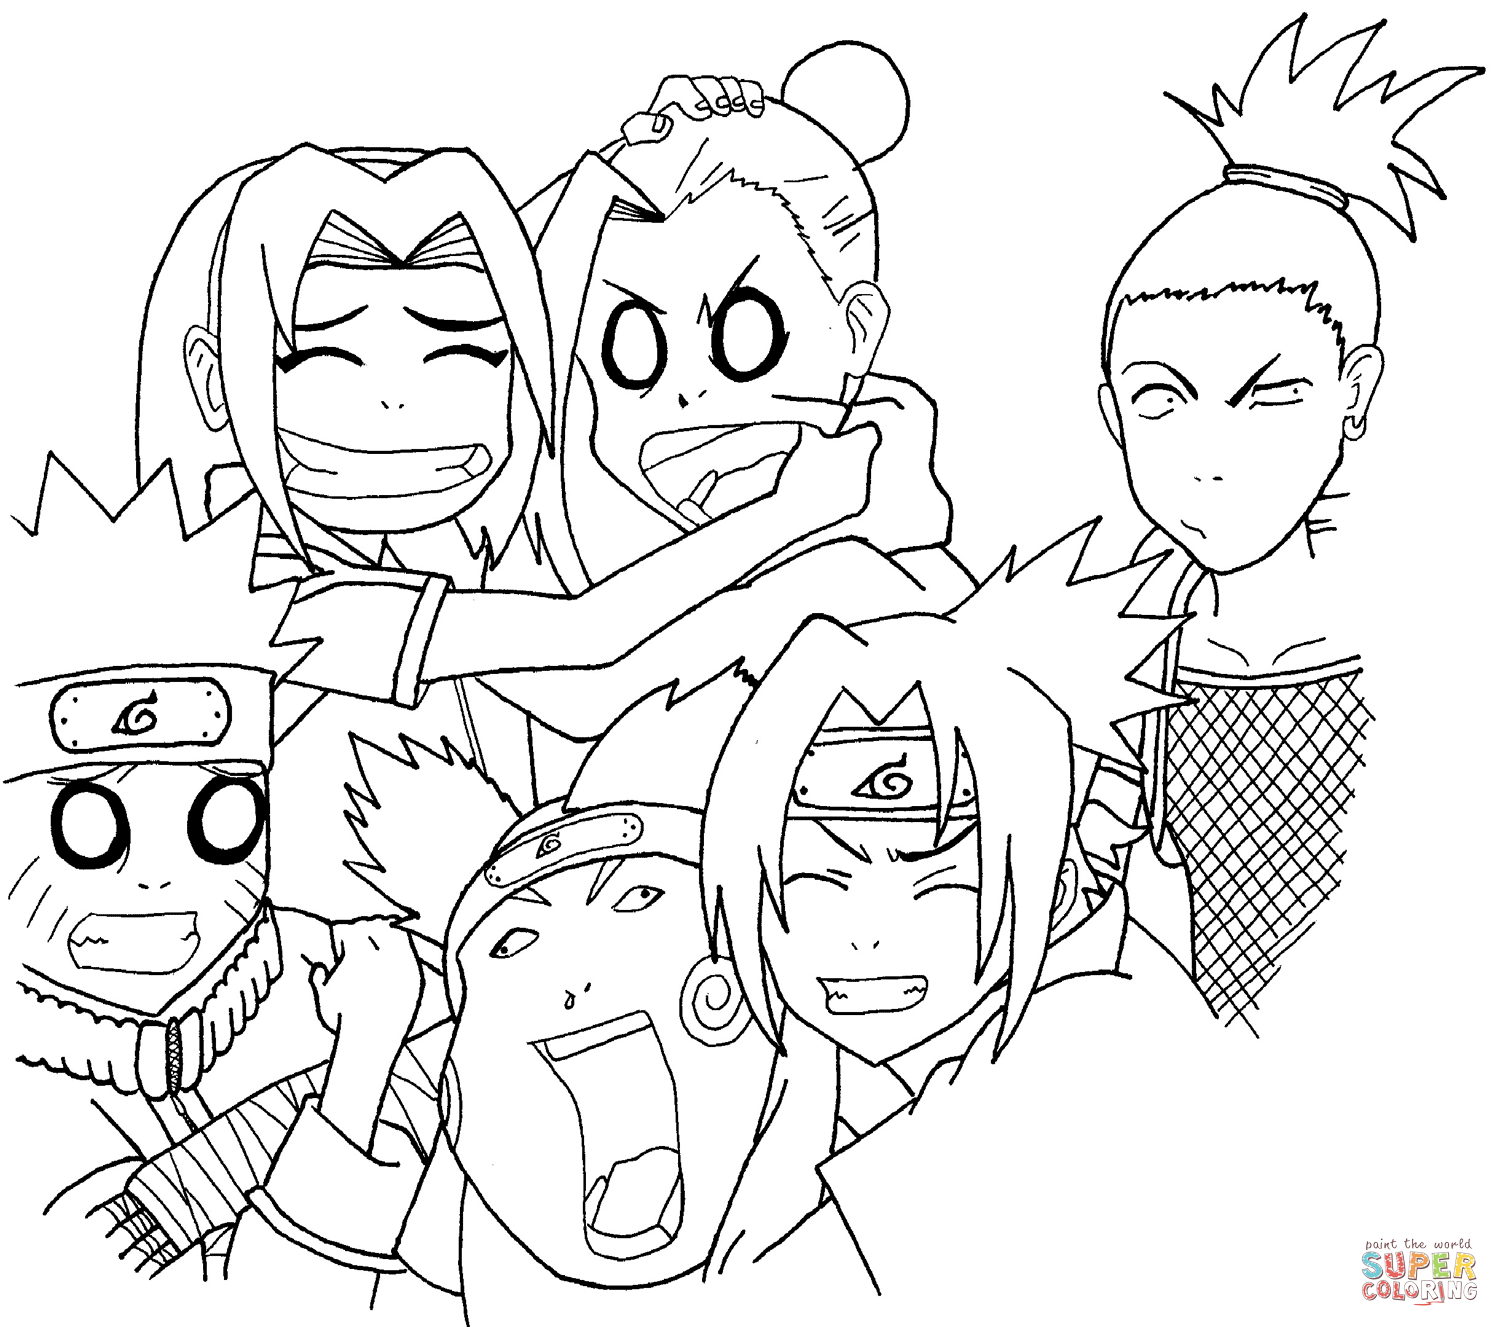 Coloring pages: naruto sage mode coloring pages